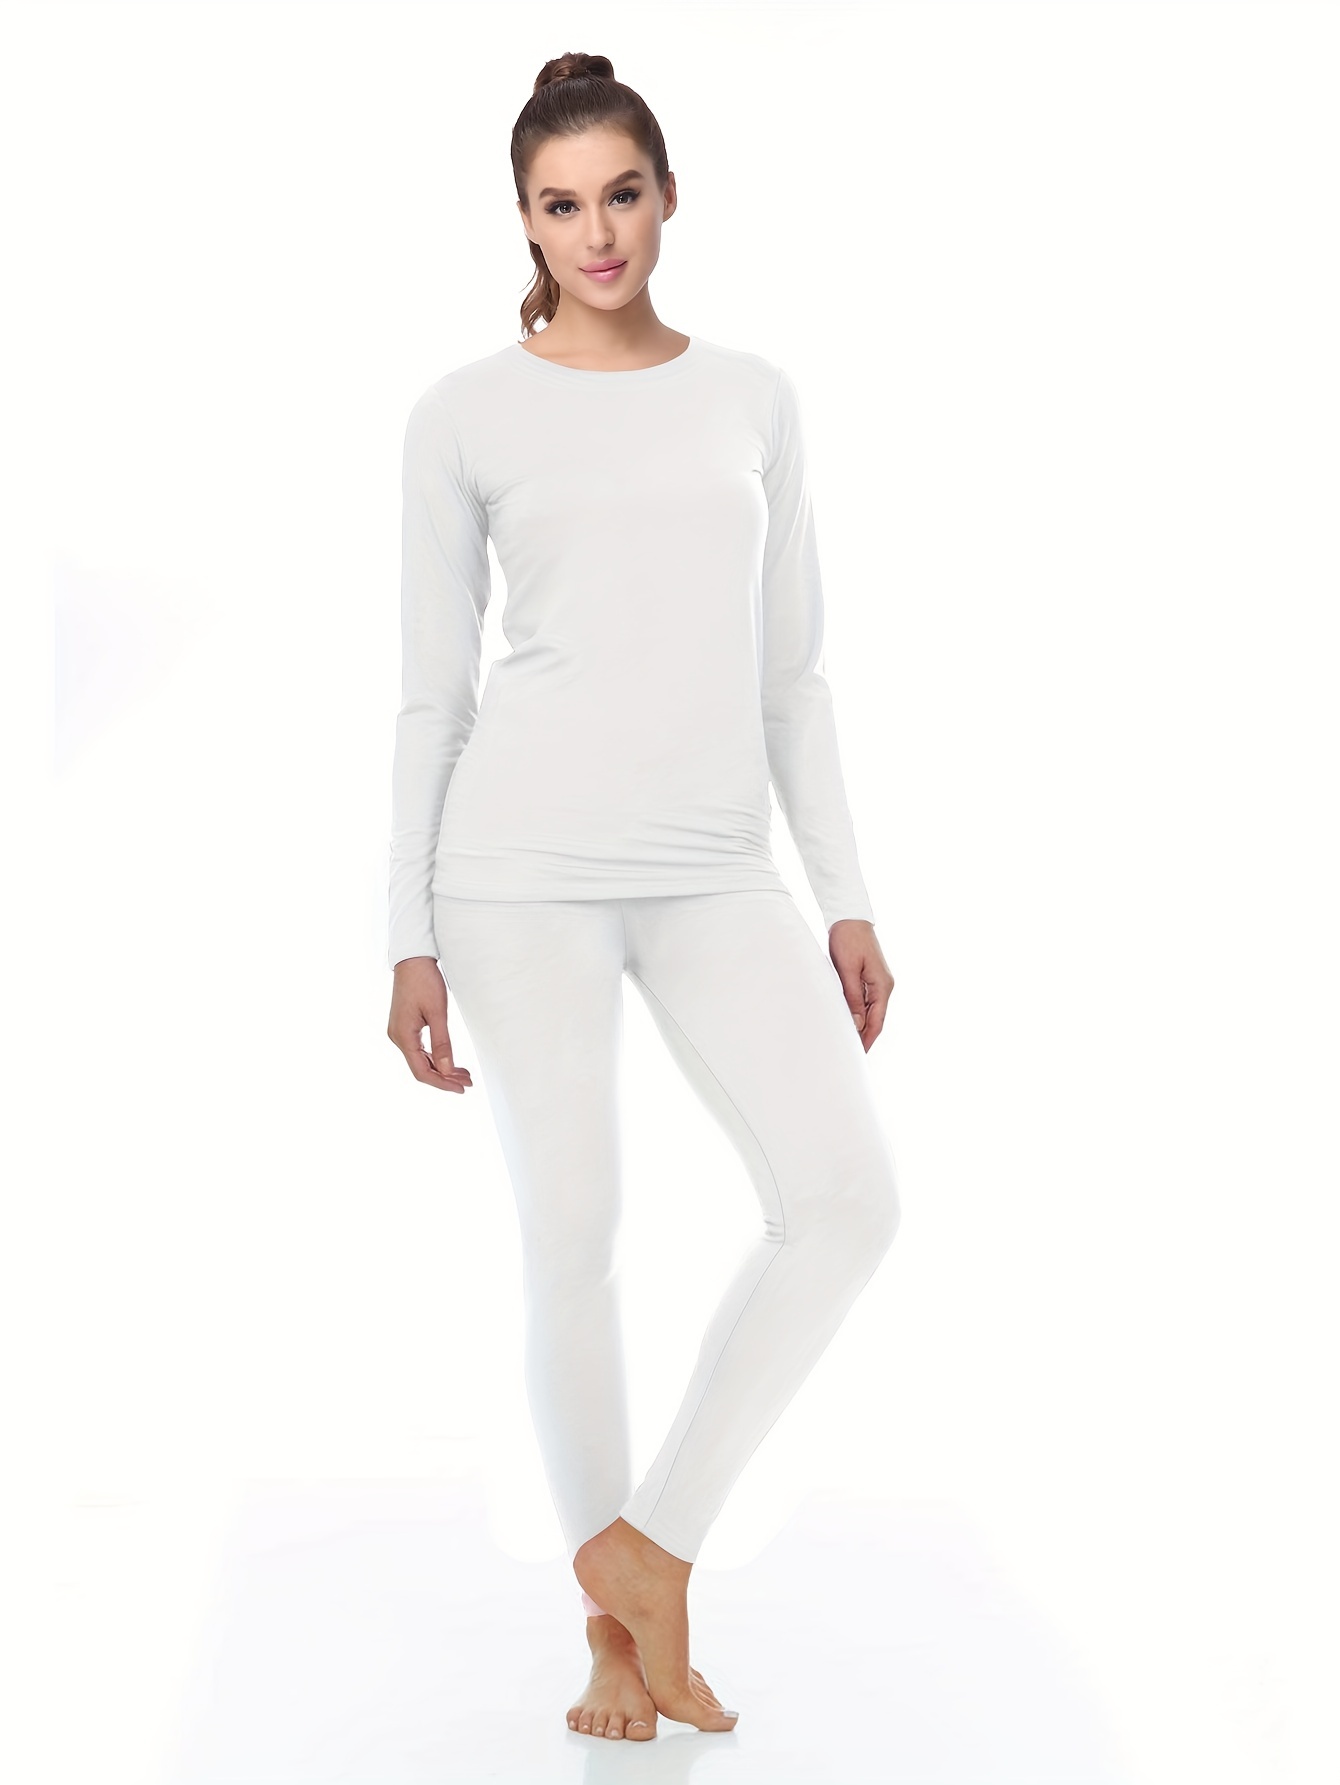 Womens Long Johns Sets Thermal Underwear Tops and Fleece Lined